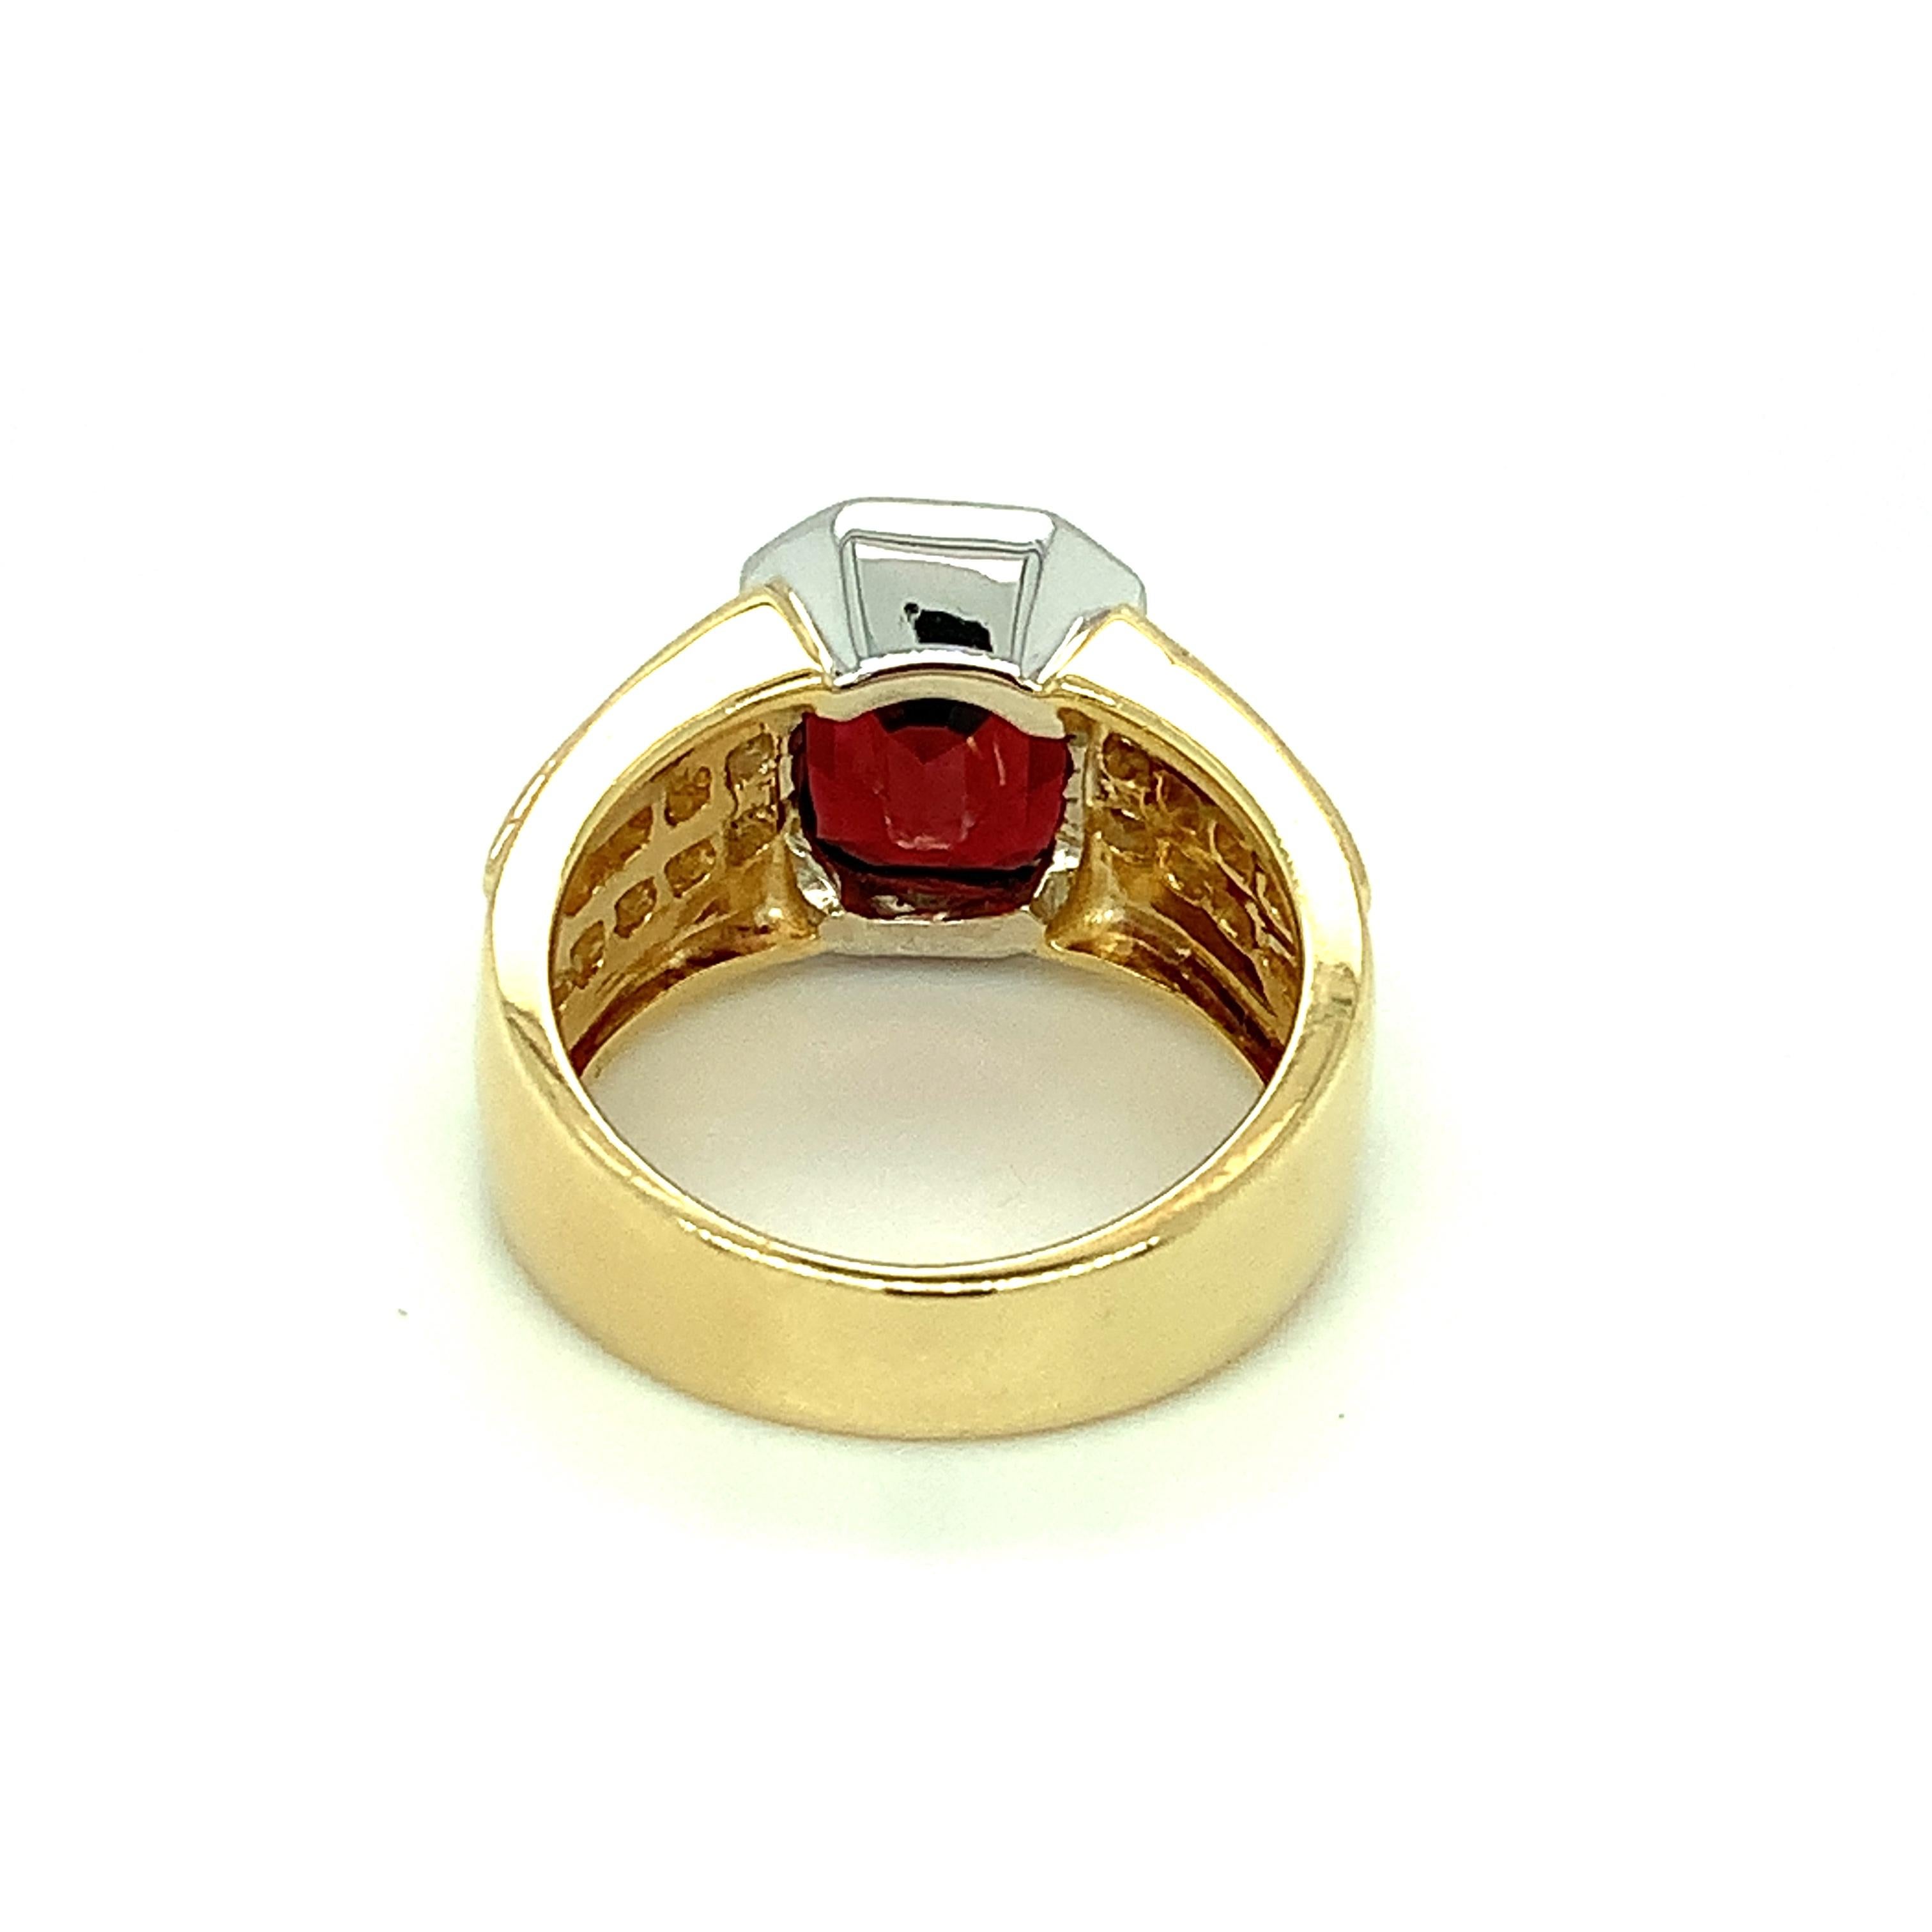 Emerald Cut 5.56 Carat Garnet and Channel Set Diamond Ring in 18k Yellow and White Gold  For Sale